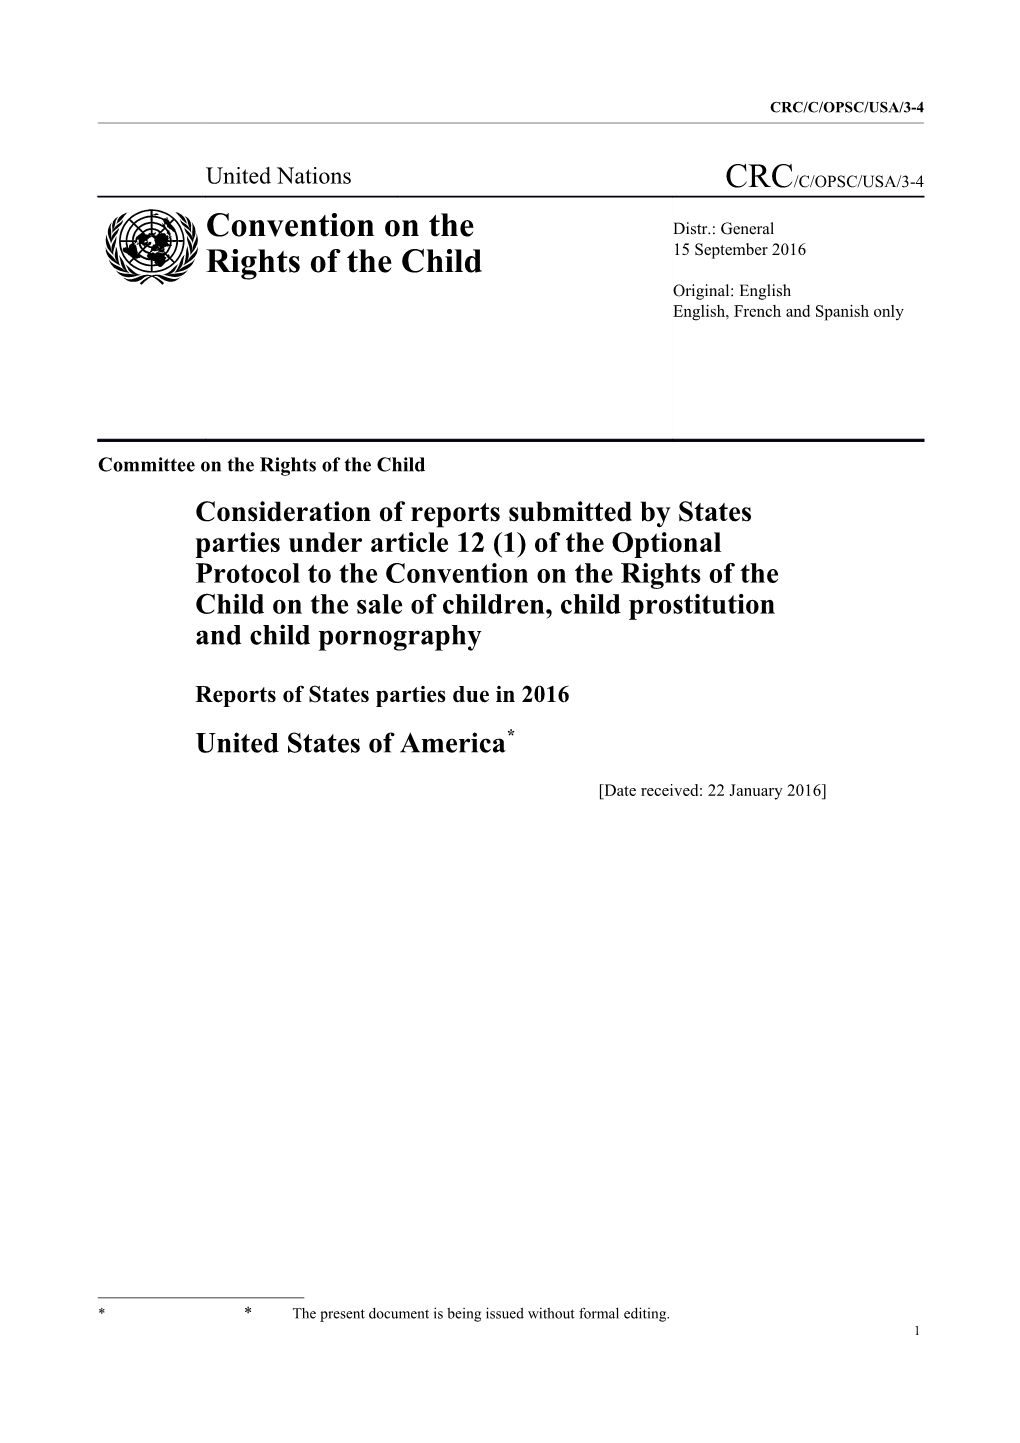 Committee on the Rights of the Child s2